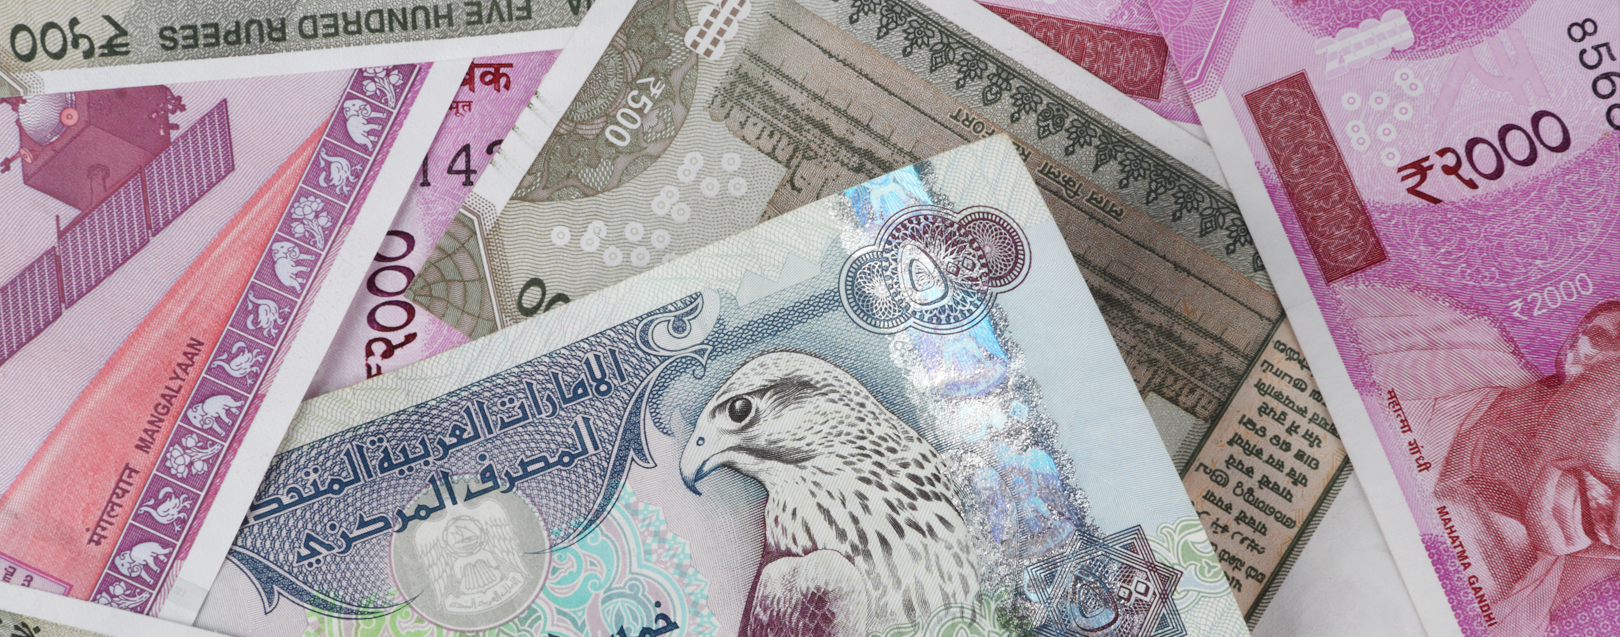 India and UAE could start trade in Rupee-Riyal in the upcoming months